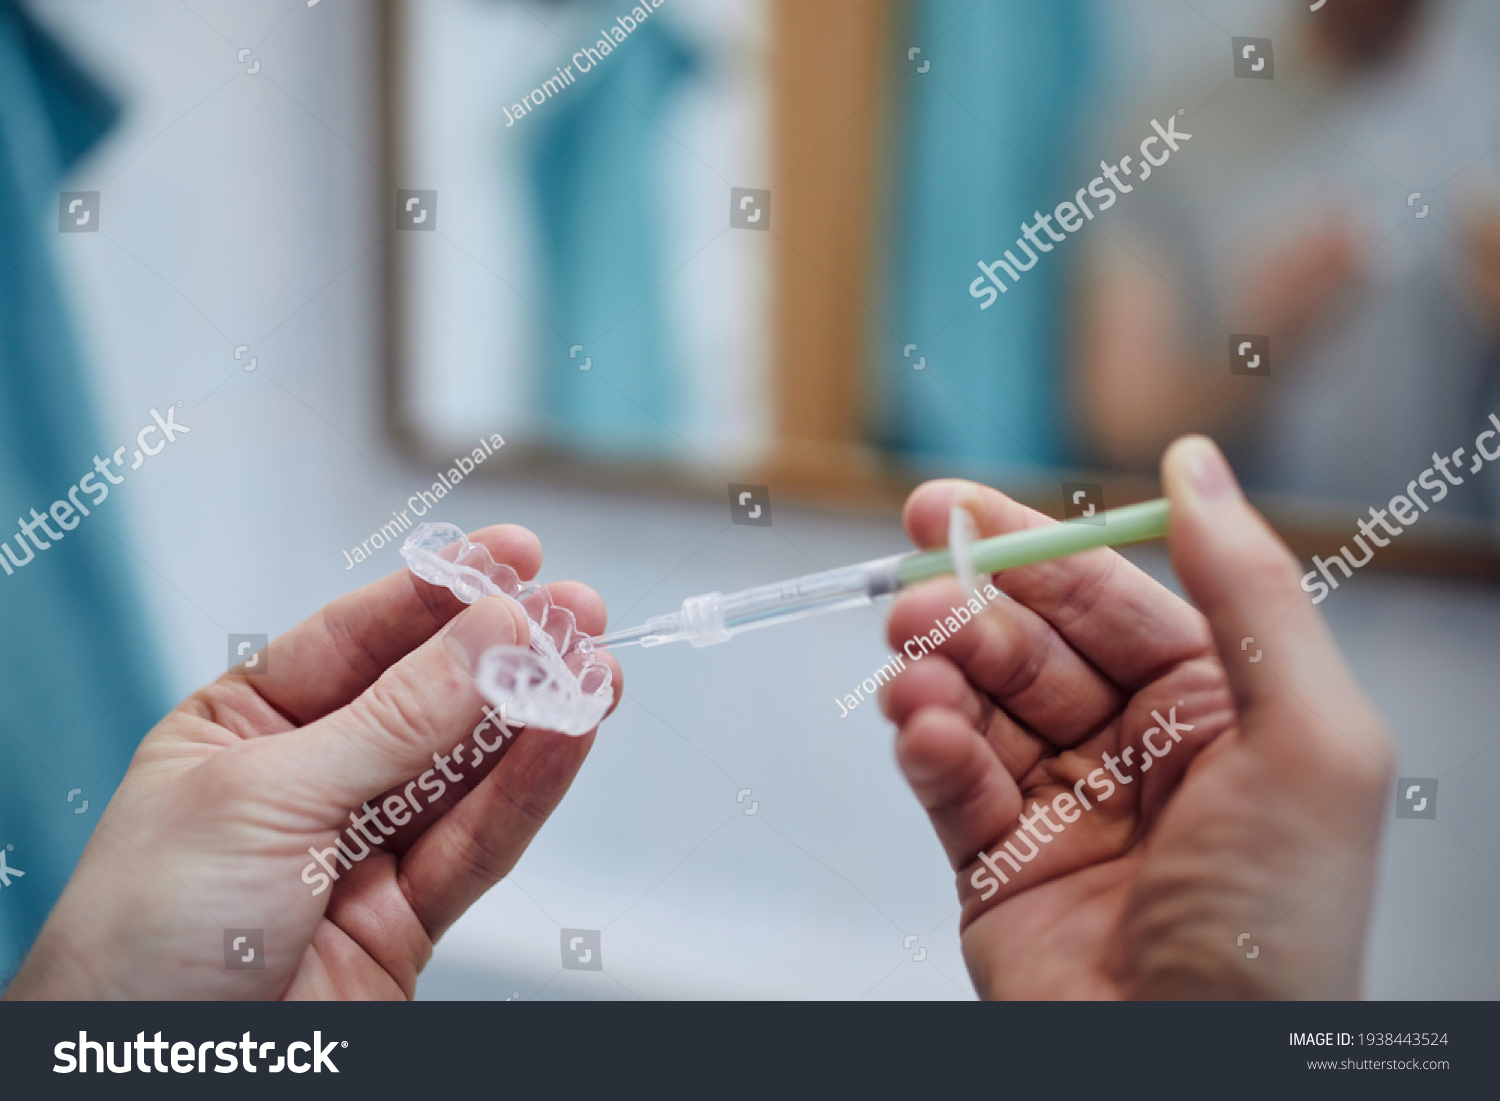 Young man preparing silicon tray for teeth whitening and bleaching gel syringe. Themes dental health, care and beauty.  #1938443524